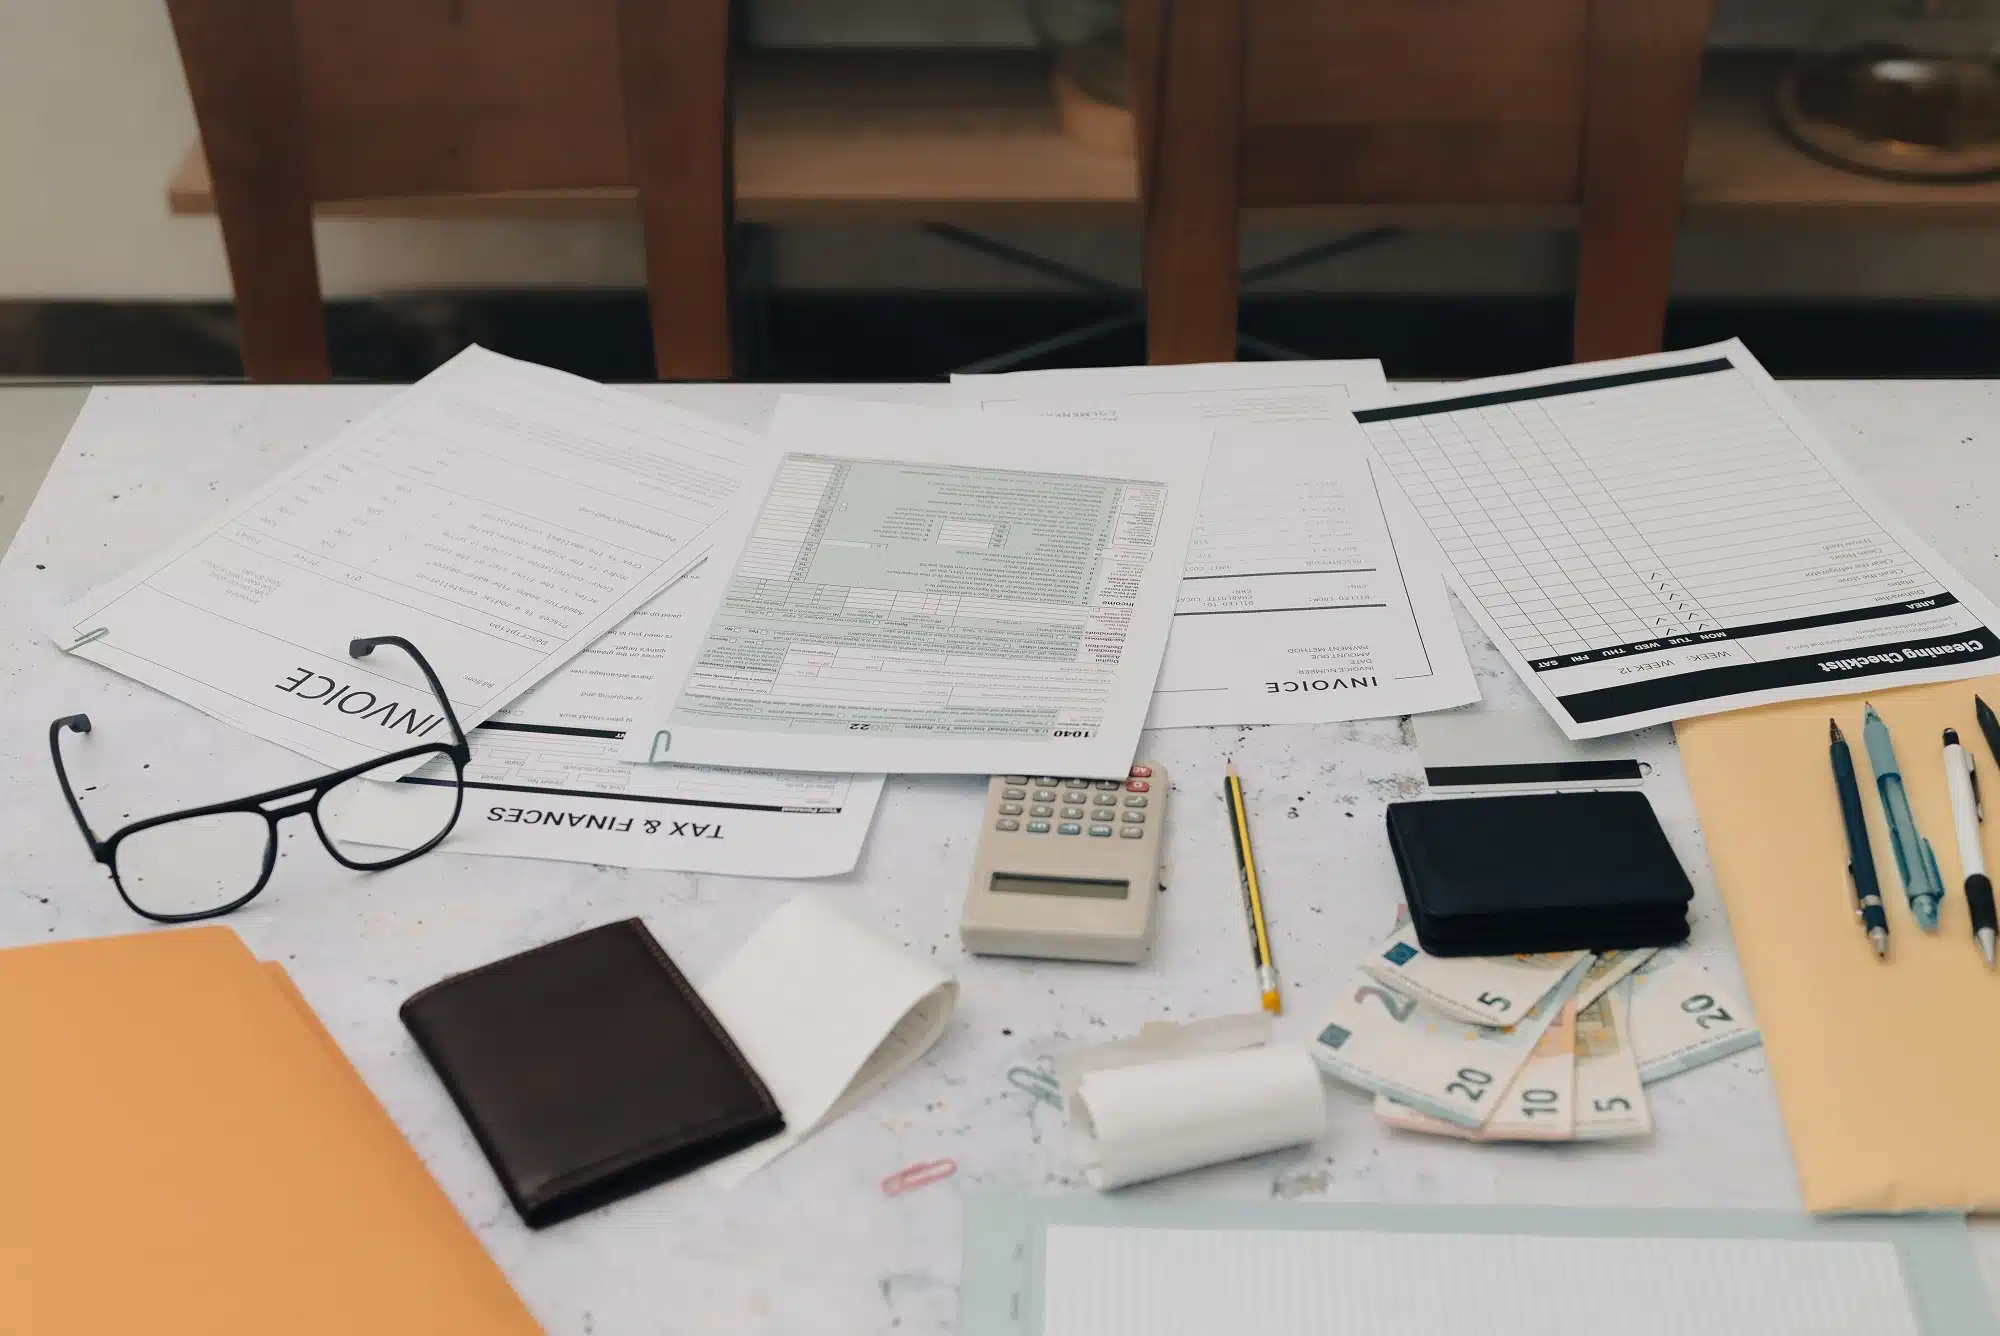 A table topped with invoices and tax forms, pens, and cash.